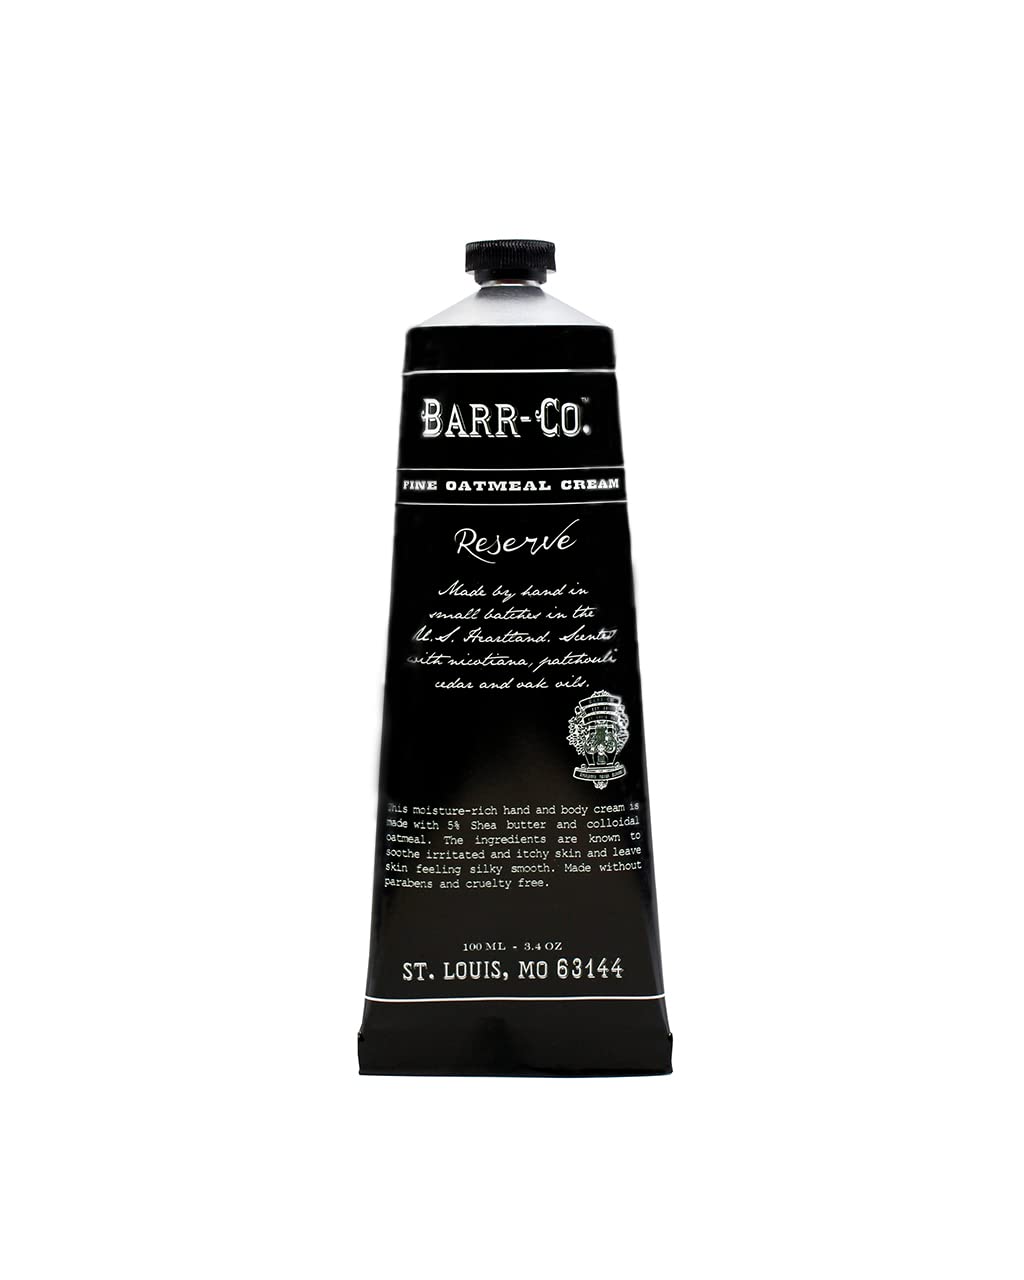 BARR-CO. Reserve Hand & Body Cream, Woody Patchouli & Nicote